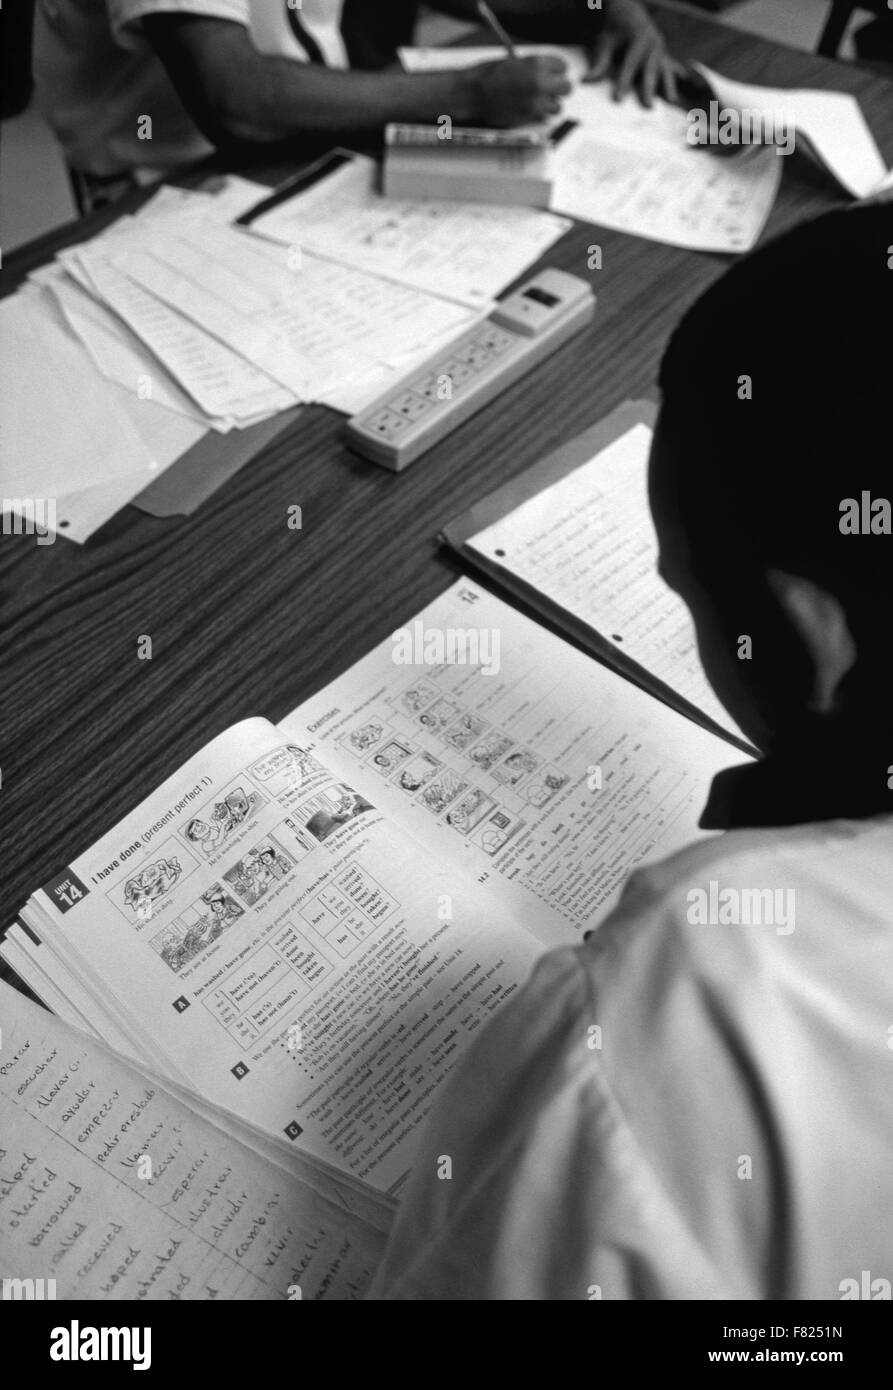 State Prisoners study English textbooks at a correctional facility in Georgia. Stock Photo